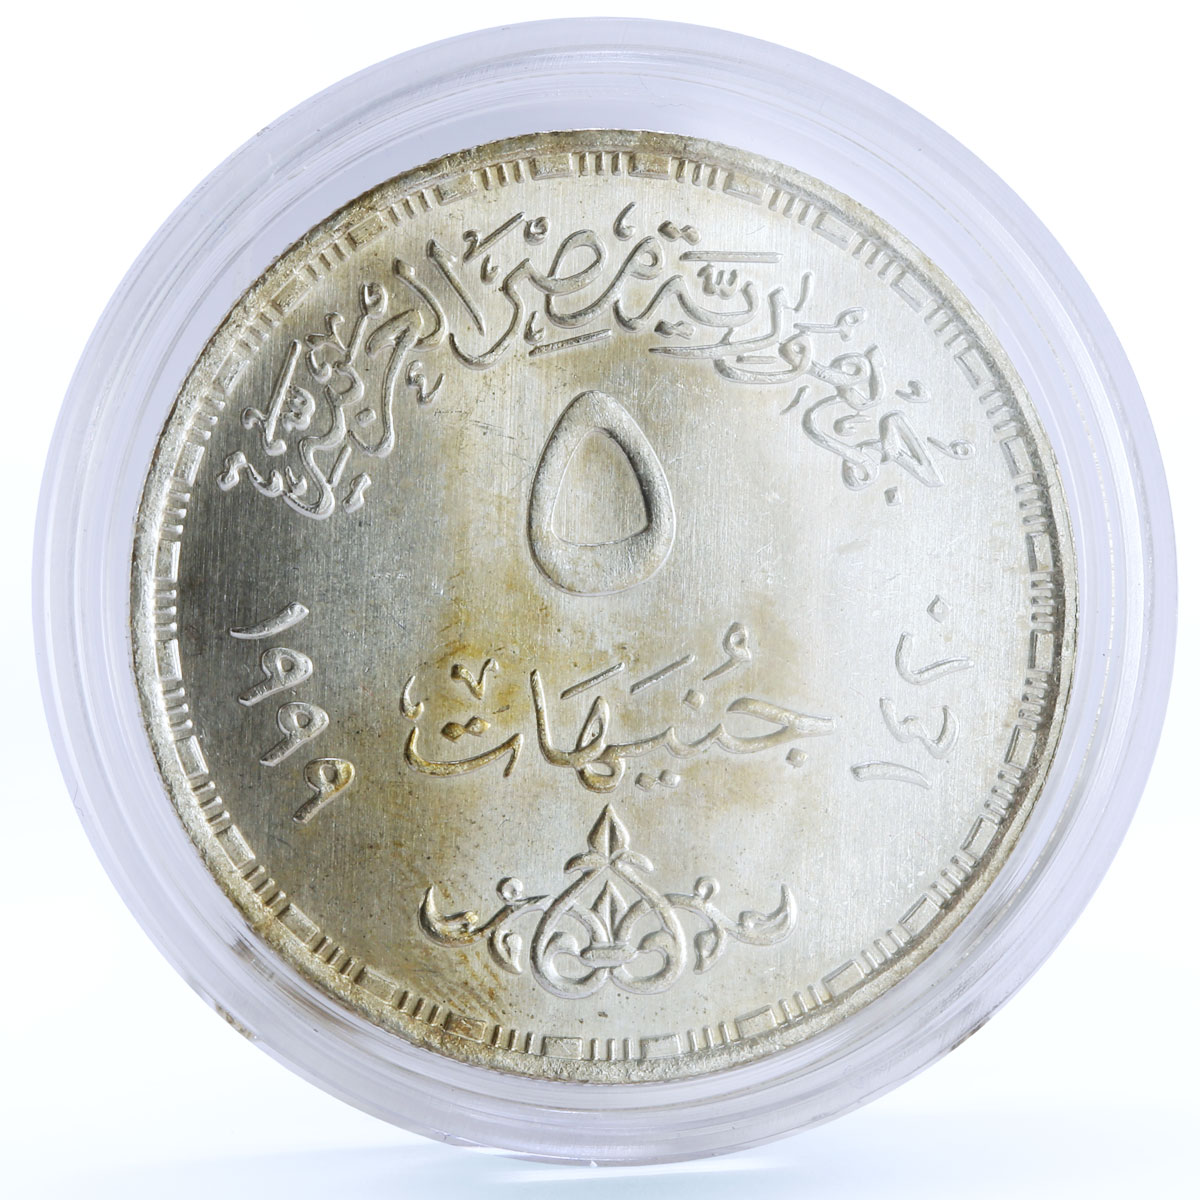 Egypt 5 pounds Cairo University Faculty of Science Thoth silver coin 2000